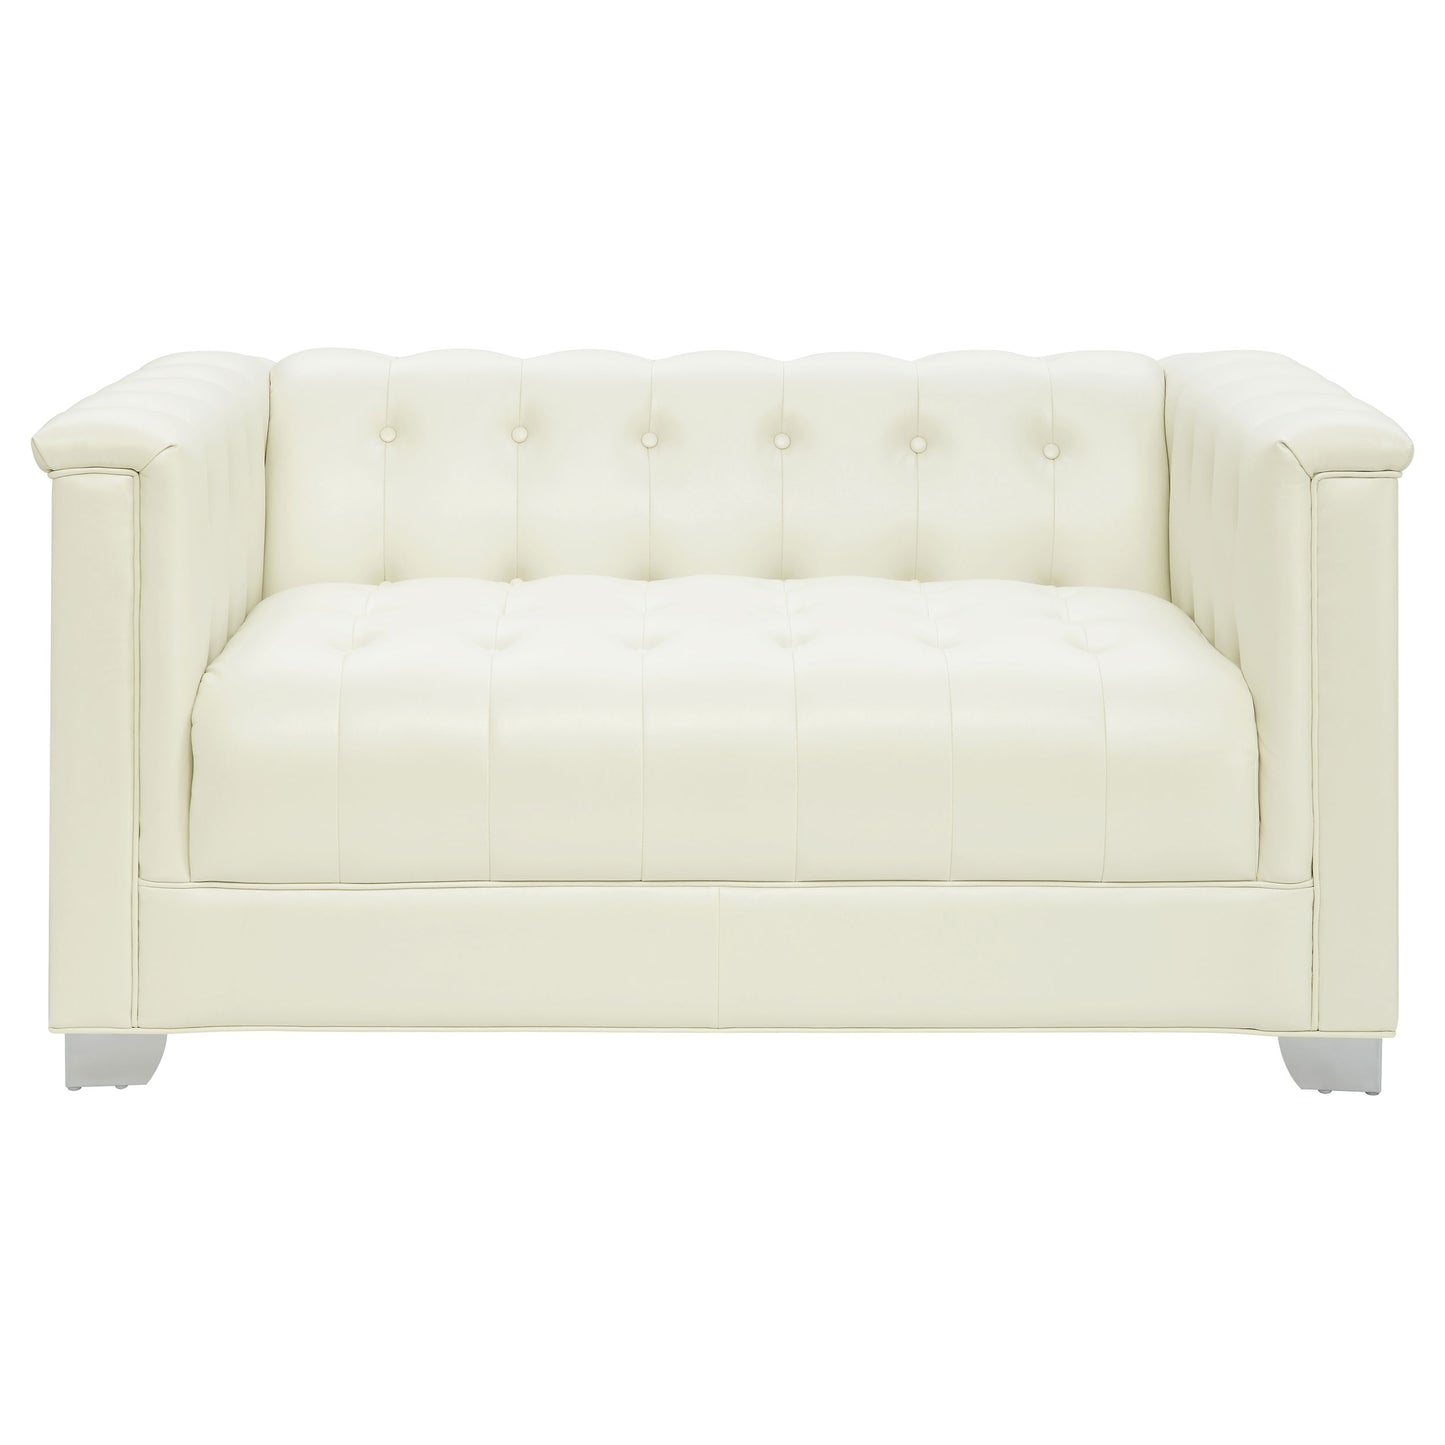 Chaviano 3-piece Upholstered Tufted Sofa Set Pearl White